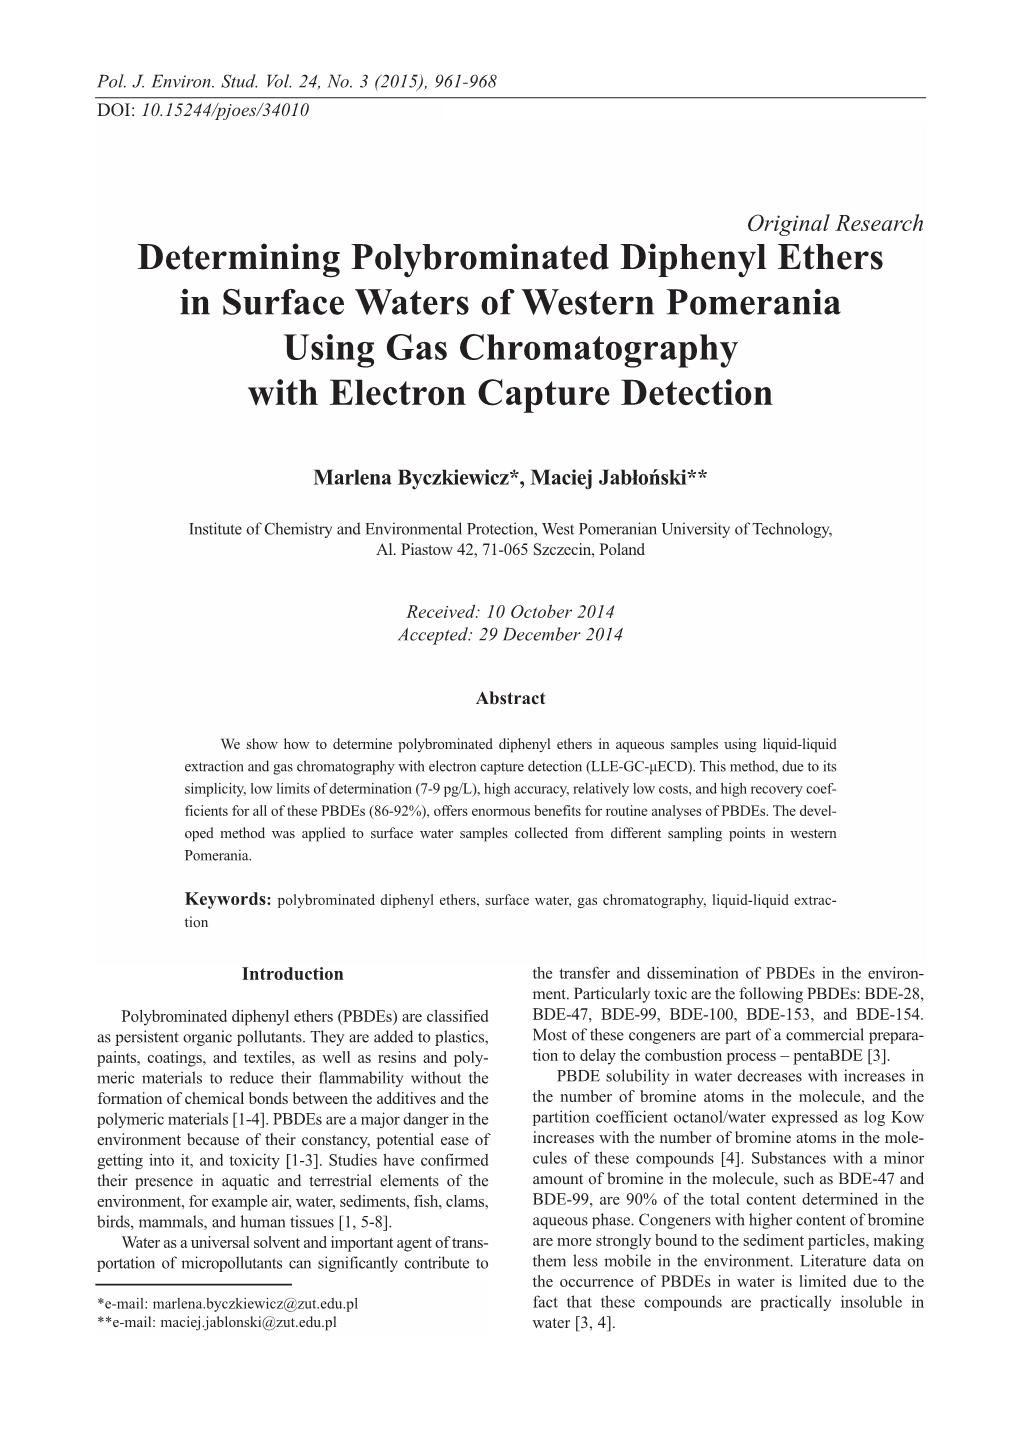 Determining Polybrominated Diphenyl Ethers in Surface Waters of Western Pomerania Using Gas Chromatography with Electron Capture Detection